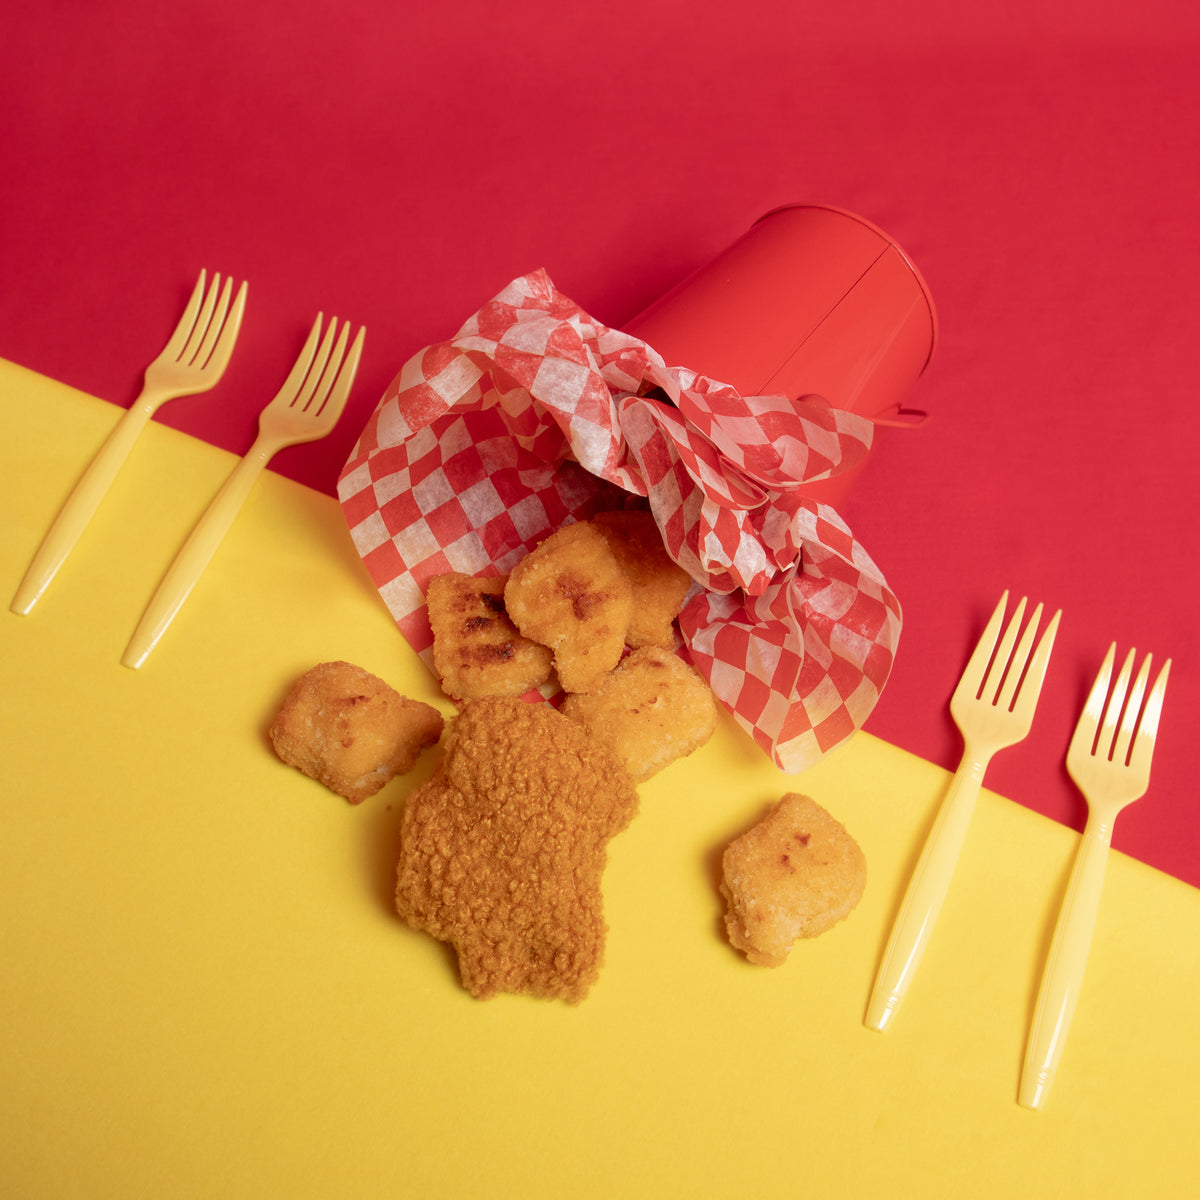 An overhead photograph of a cup lined with checkered tissue paper, real chicken nuggets and the Crewmate chicken nugget spill out of the cup. There are two forks placed on either side of the cup. Photo taken against a red and yellow background. 